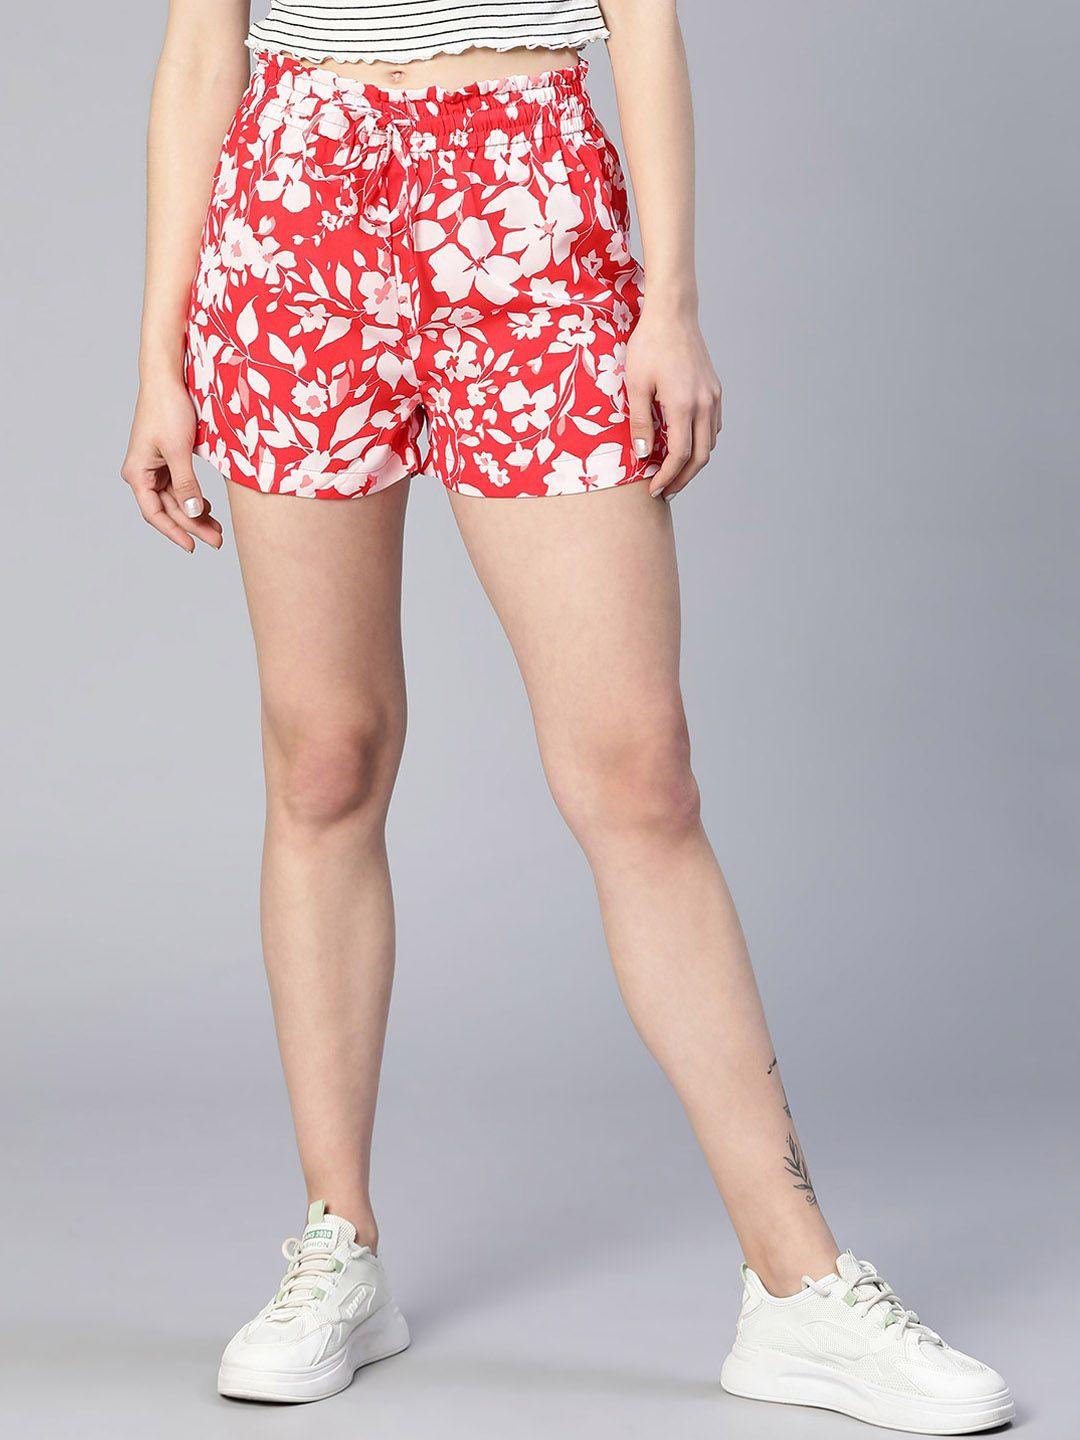 oxolloxo-women-floral-printed-mid-rise-shorts